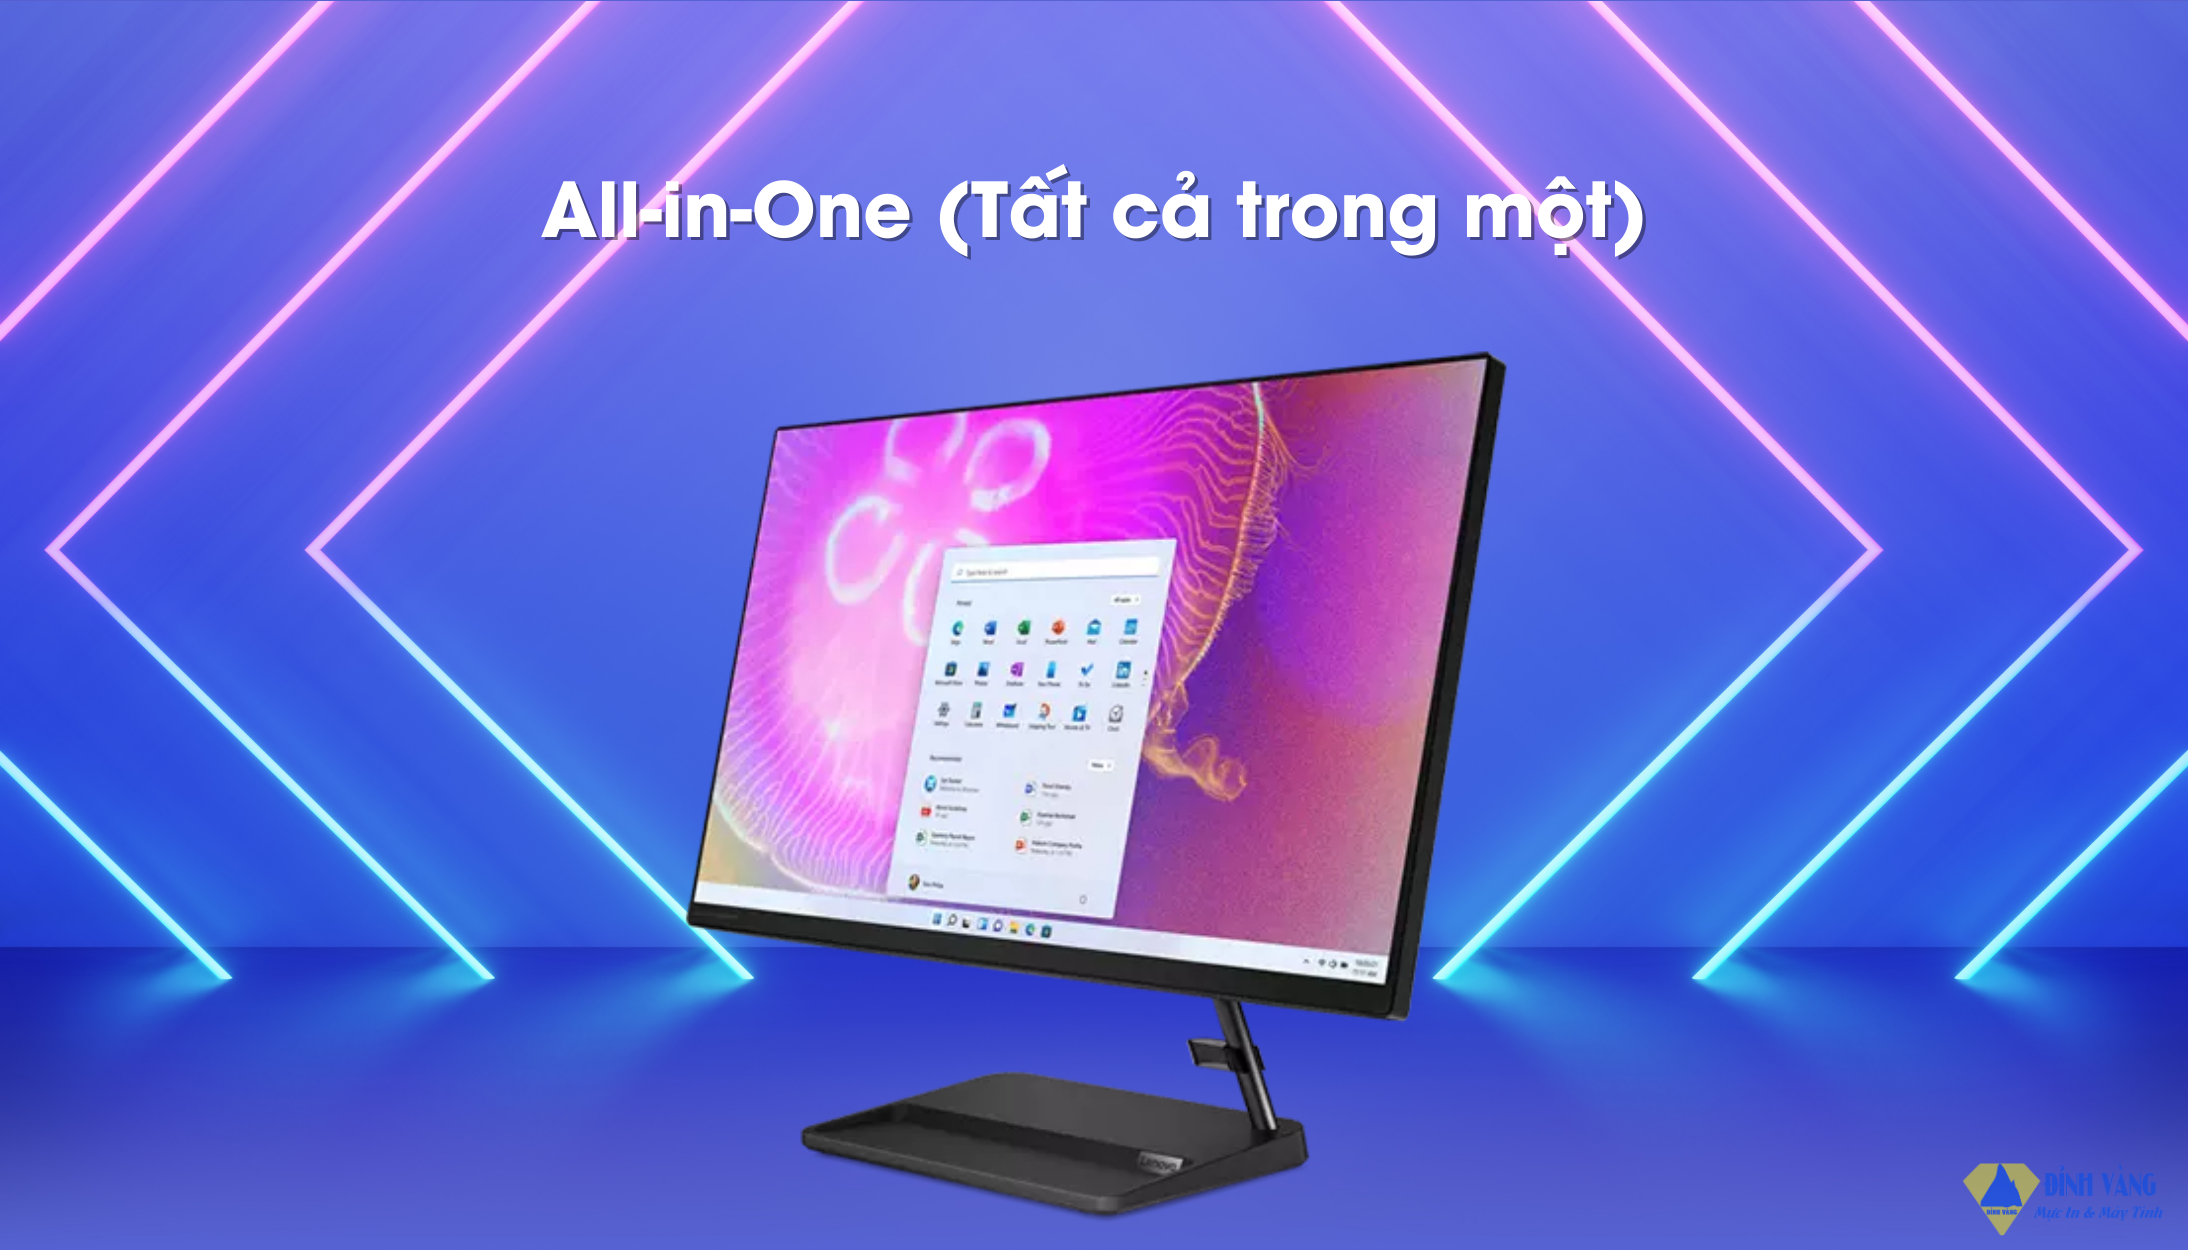 All-in-One (Tất cả trong một).